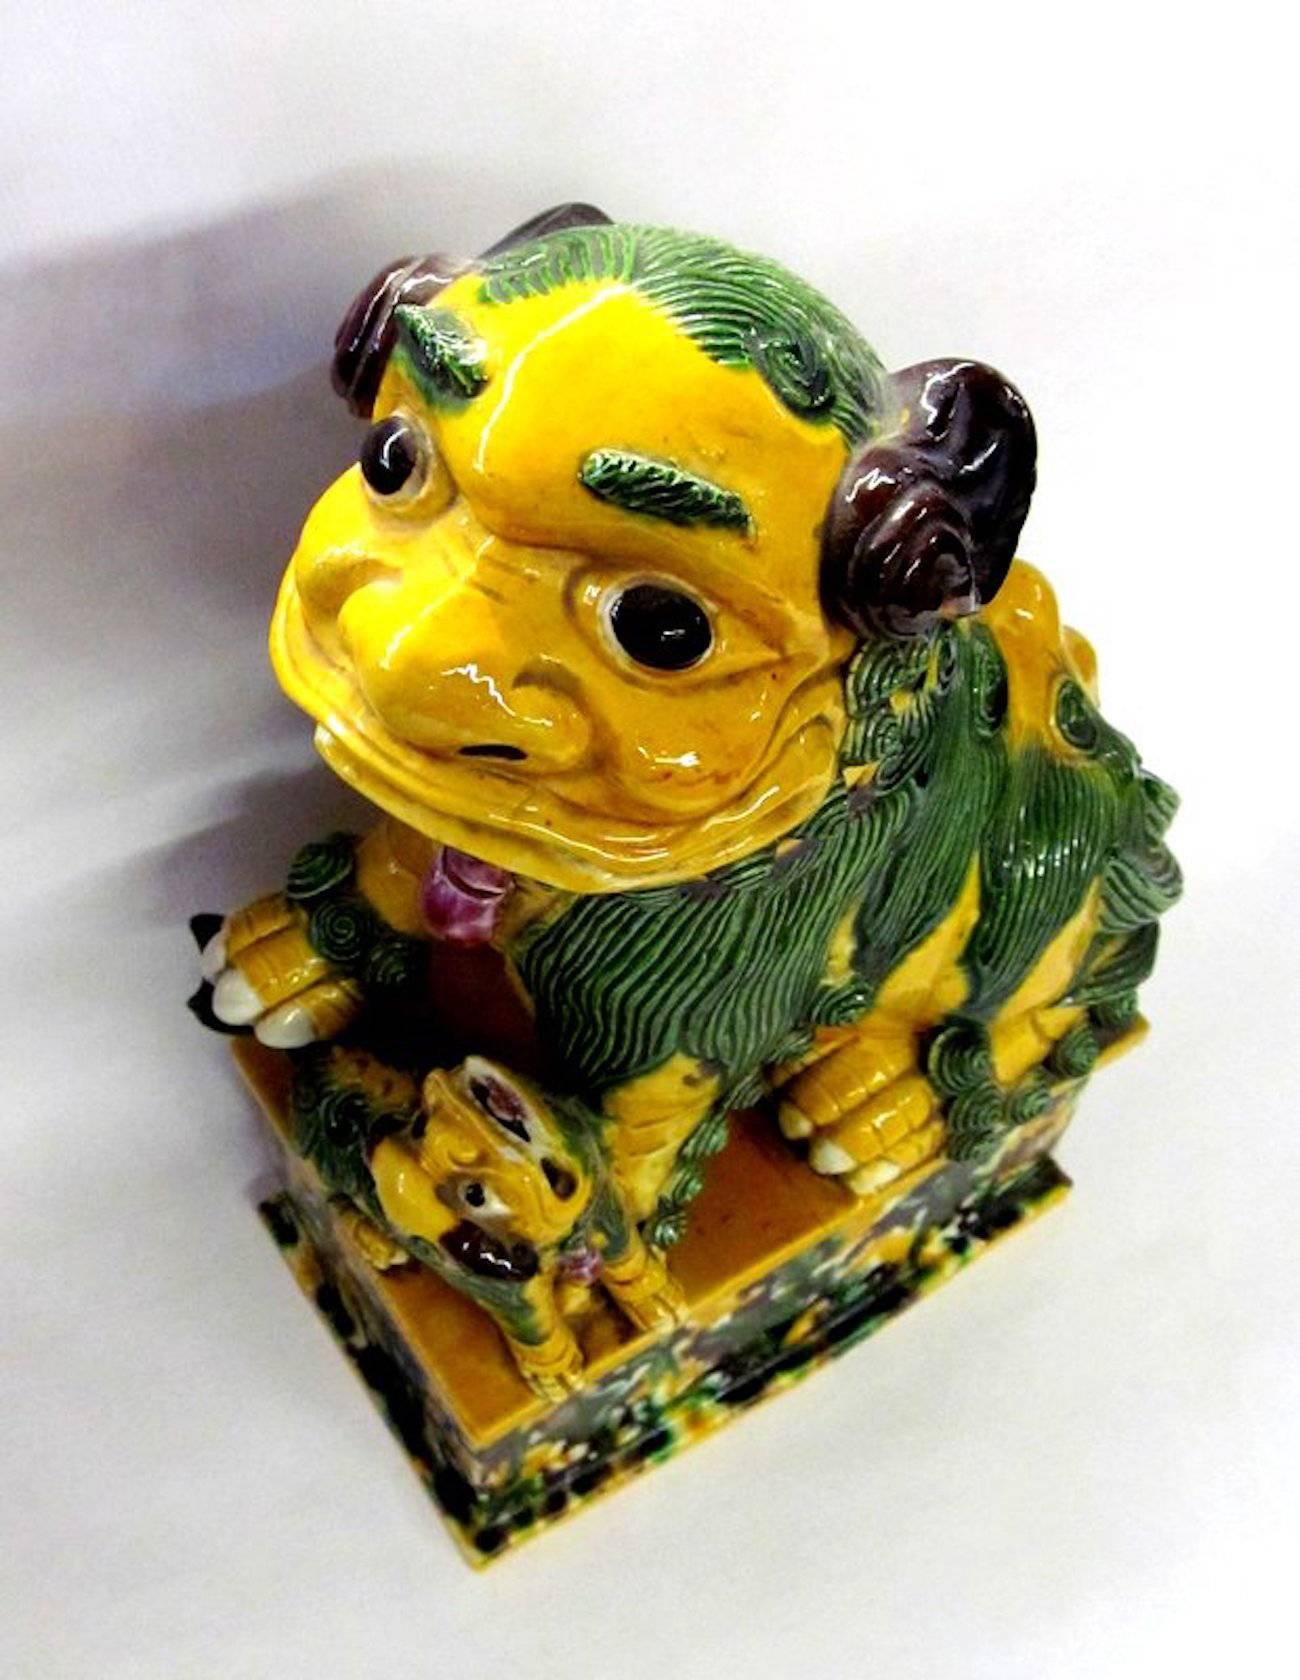 20th Century Antique Chinese Export Polychrome Ceramic Foo Dogs with Egg & Spinach Glaze